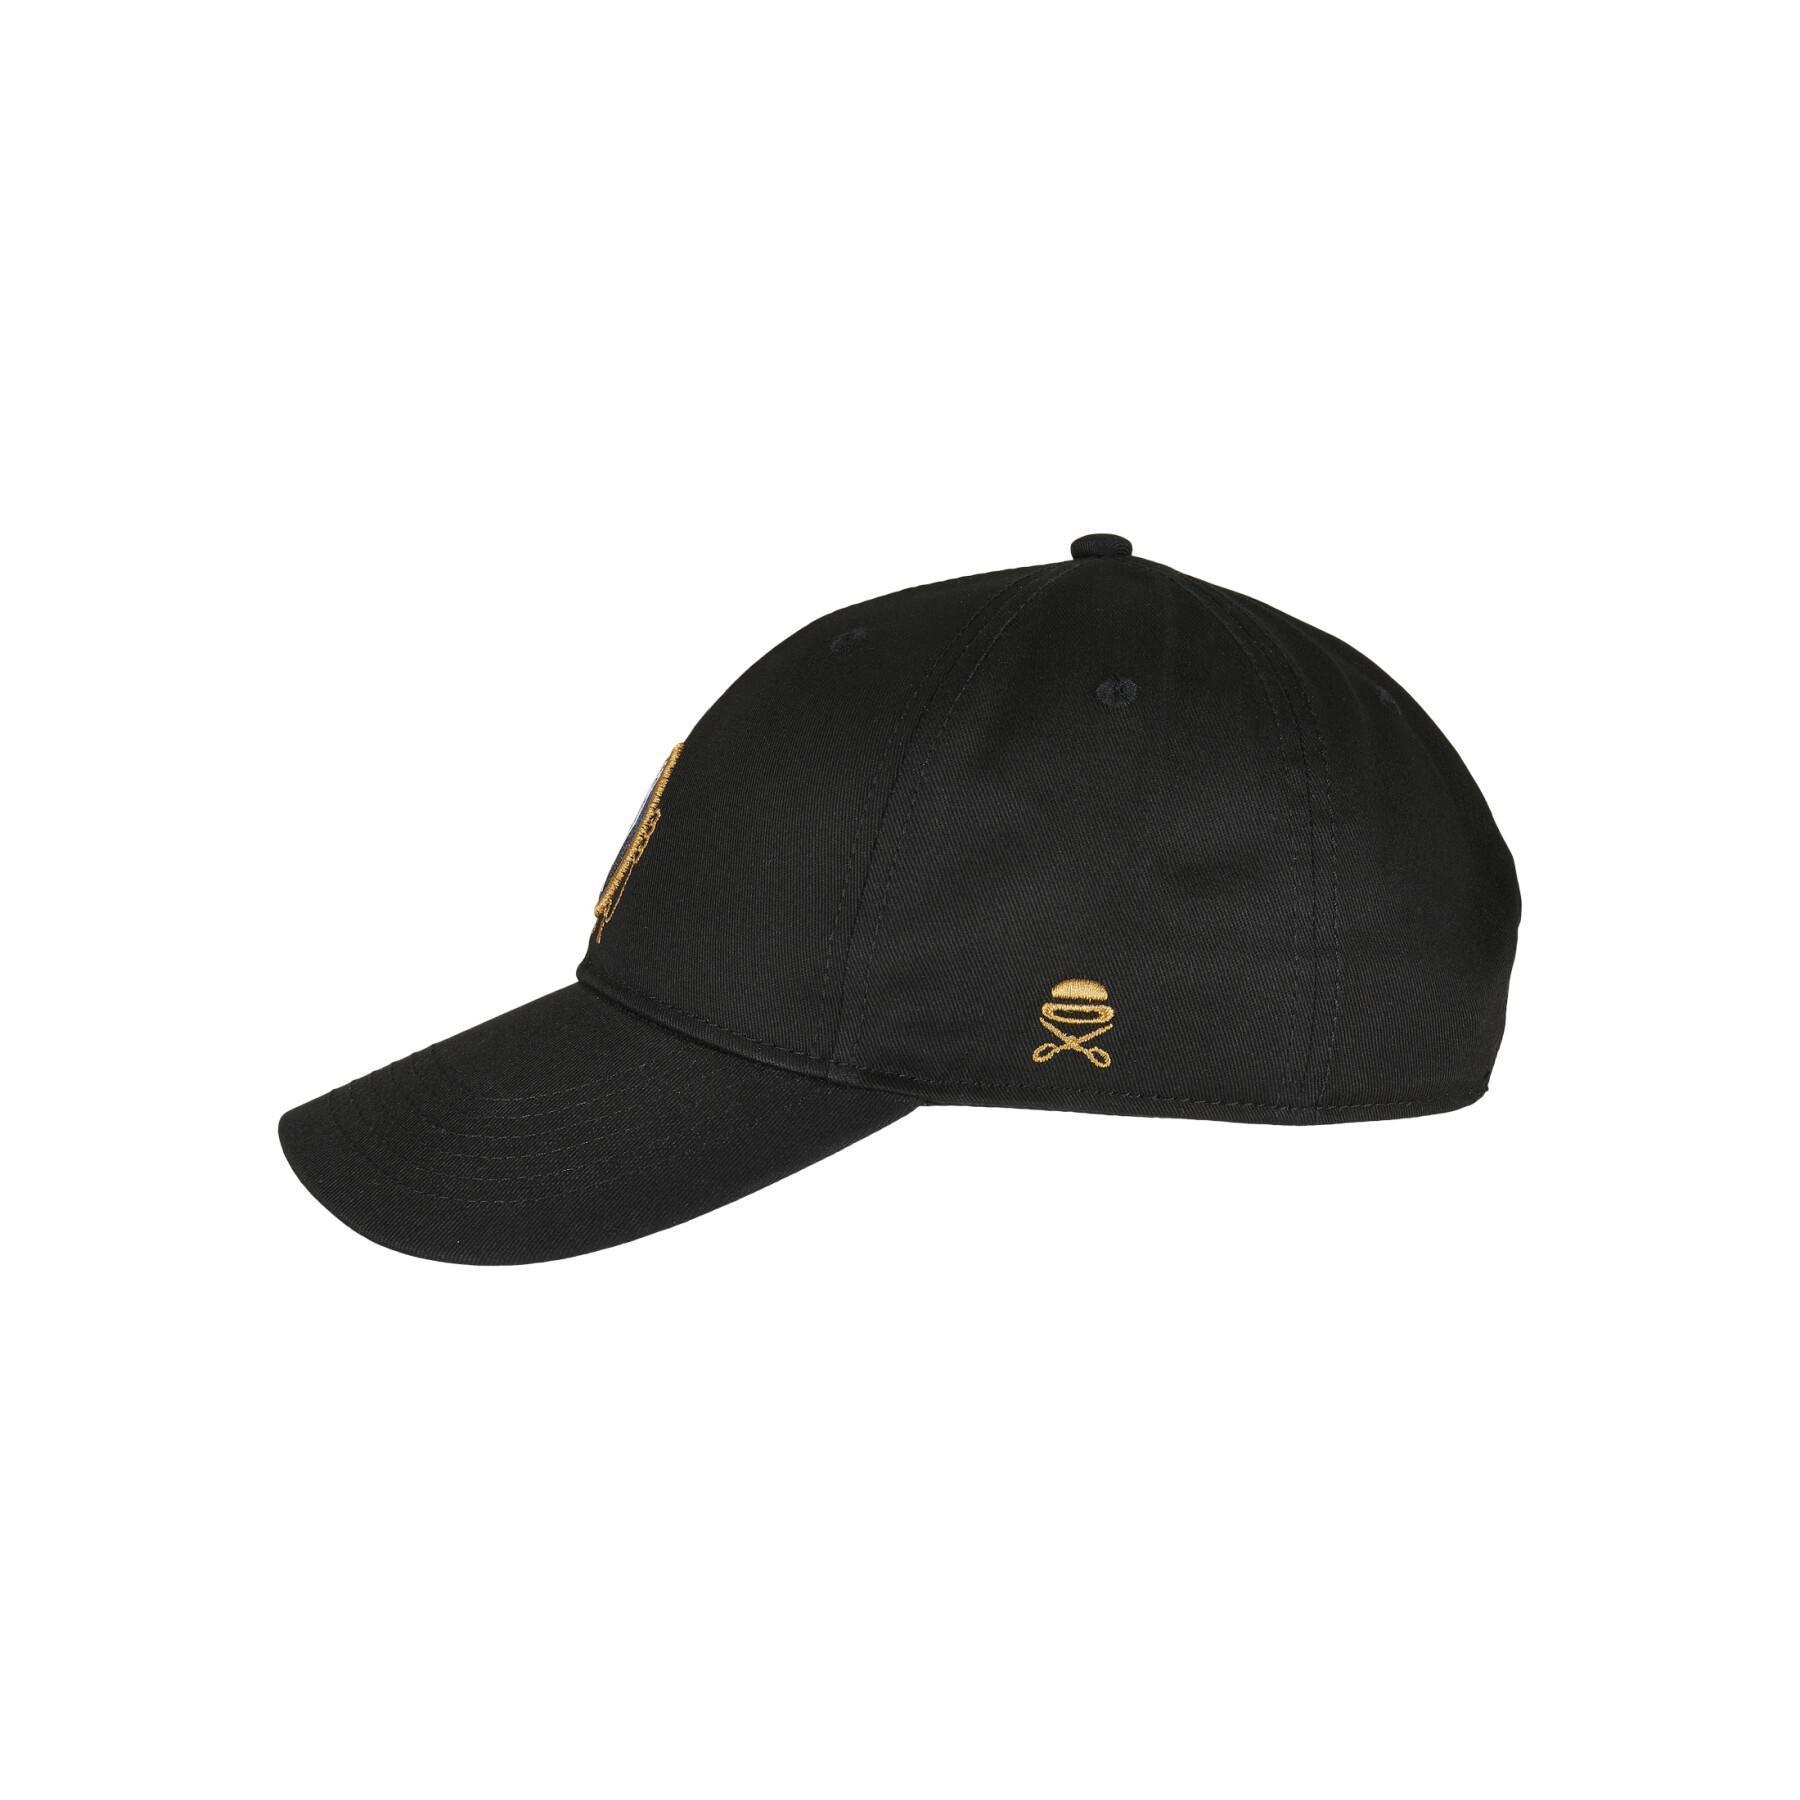 Casquette Cayler & Sons praise the chronic curved